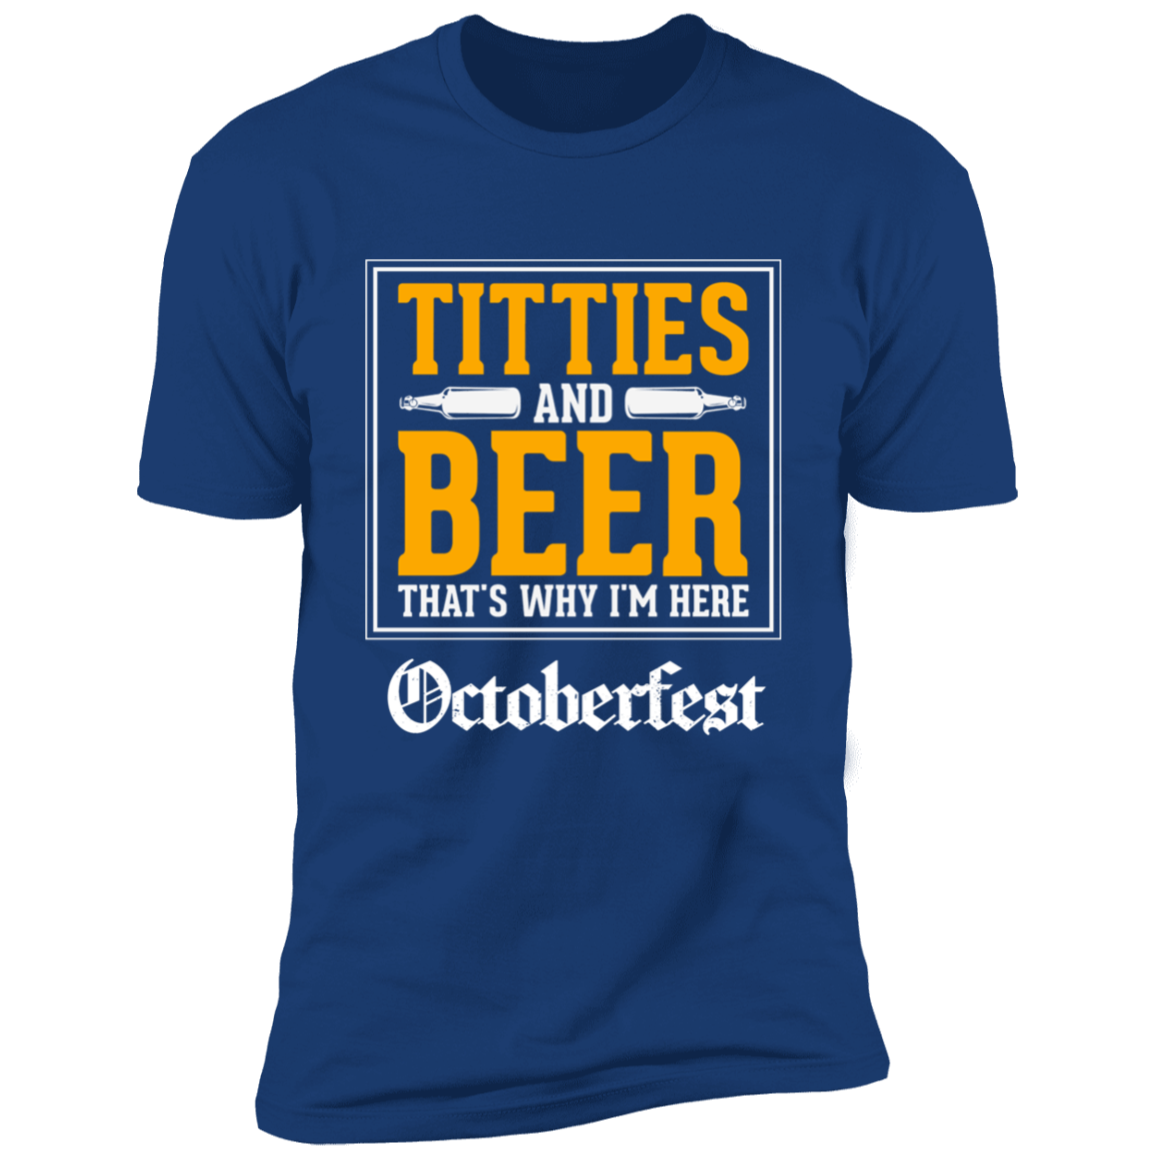 TITTIES AND BEER THAT'S WHY I'M HERE PREMIUM T-SHIRT